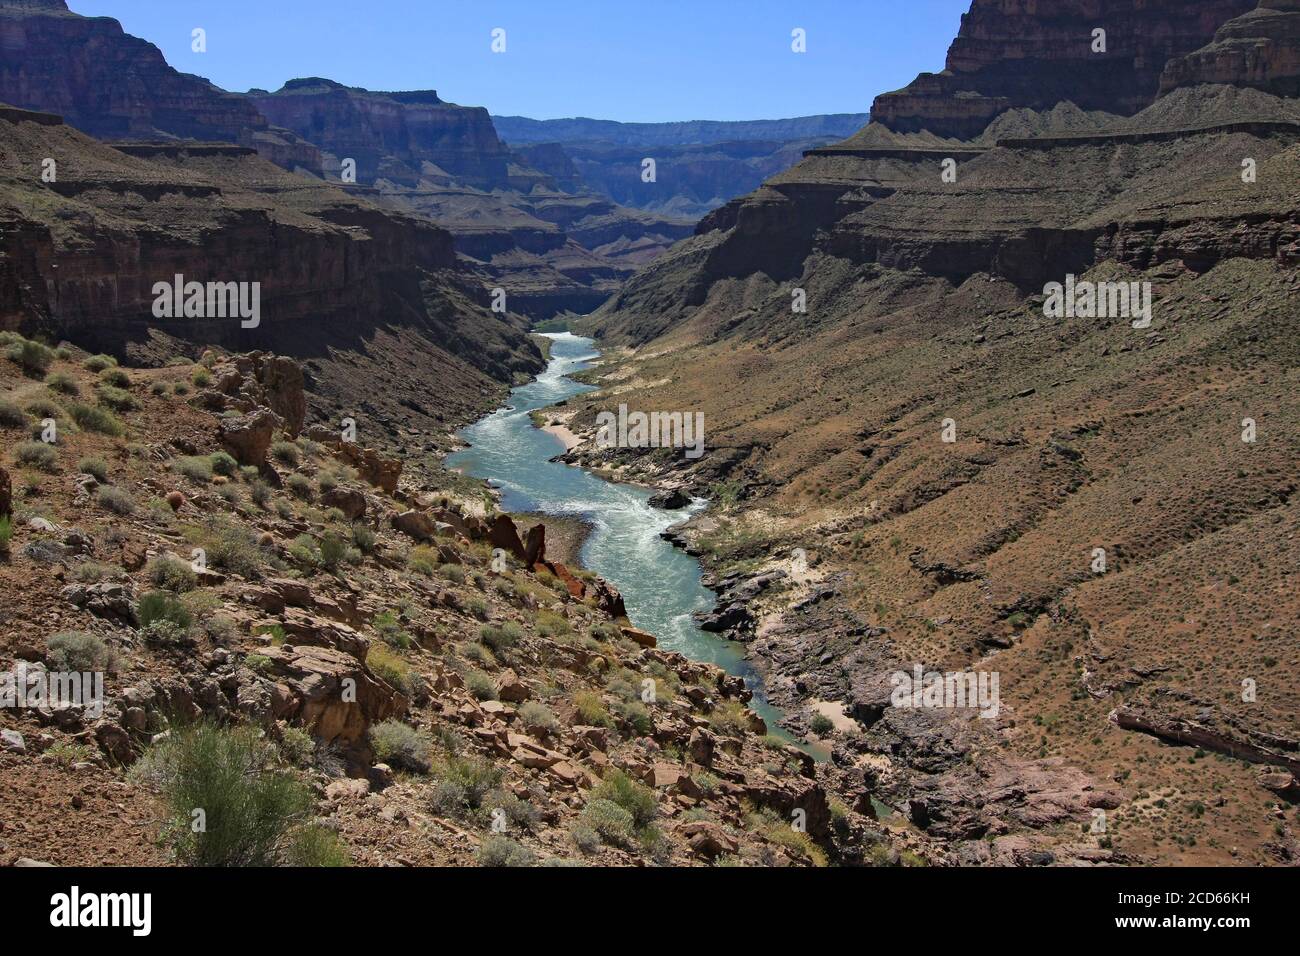 View of Colorado River and Granite Narrows in Grand Canyon National Park, Arizona from backcountry hiking trail. Stock Photo